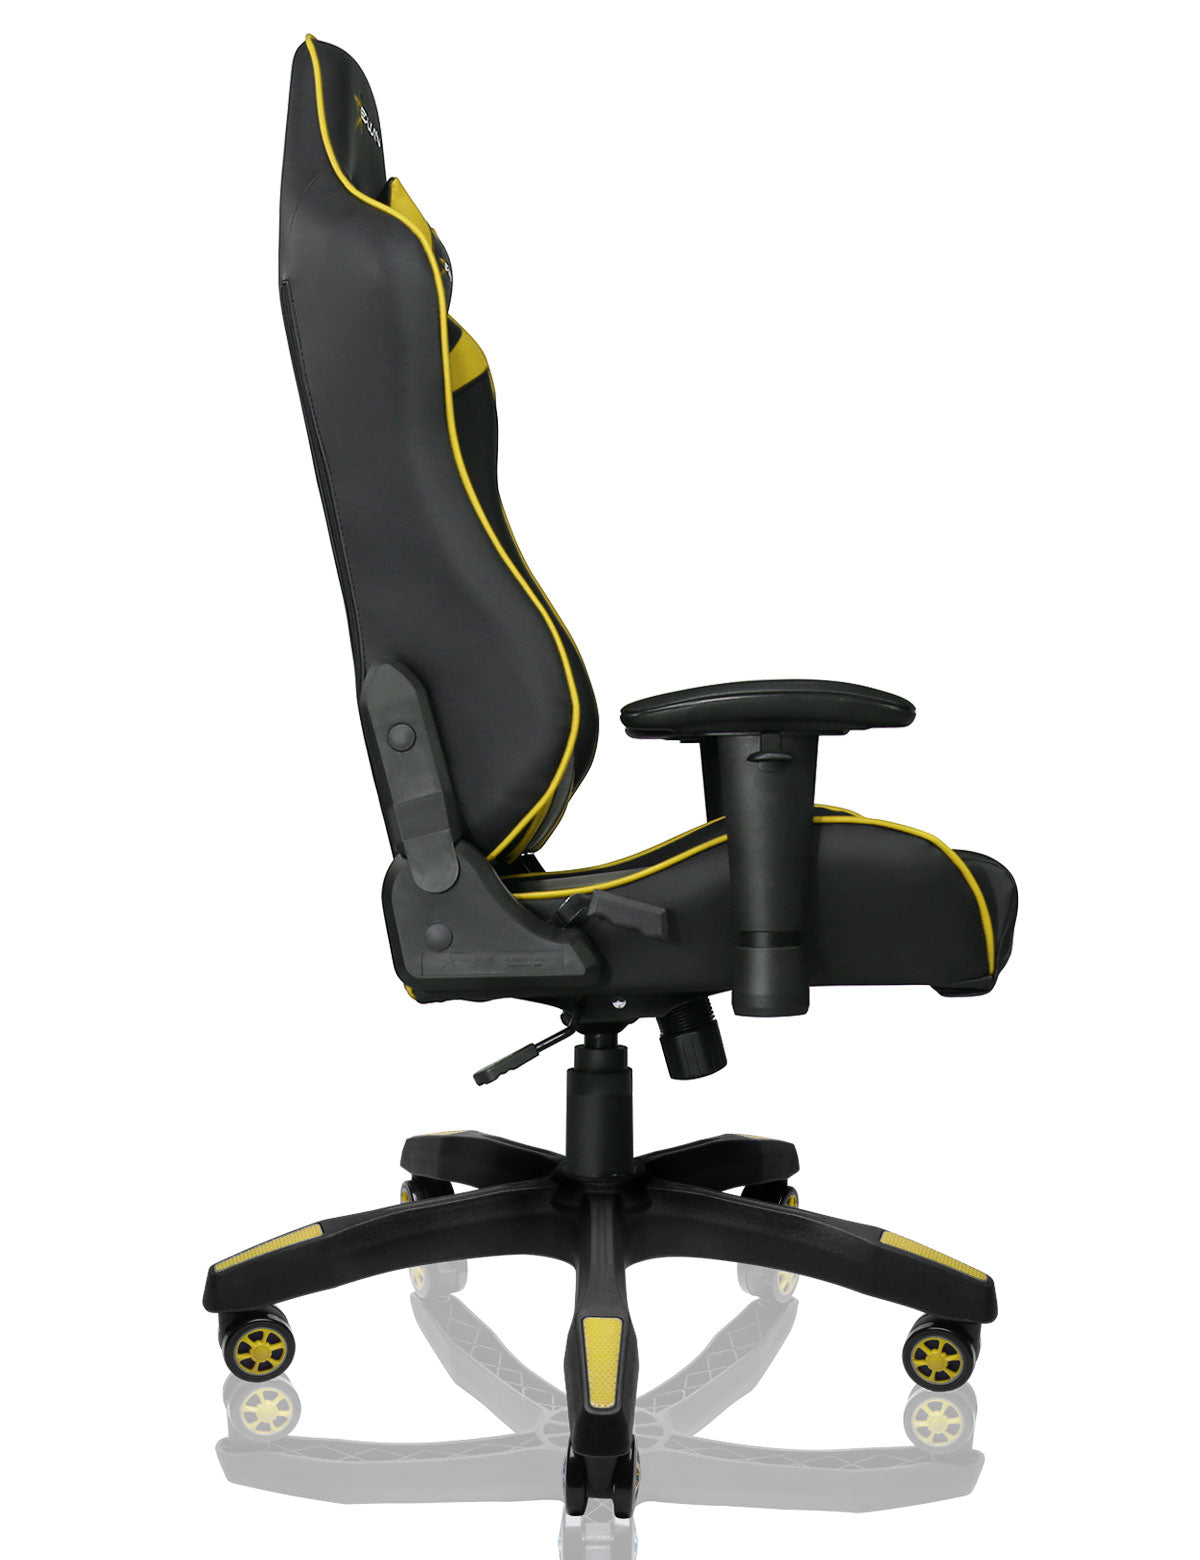 E-WIN Knight Series Ergonomic Computer Gaming Office Chair with Pillows - KTA